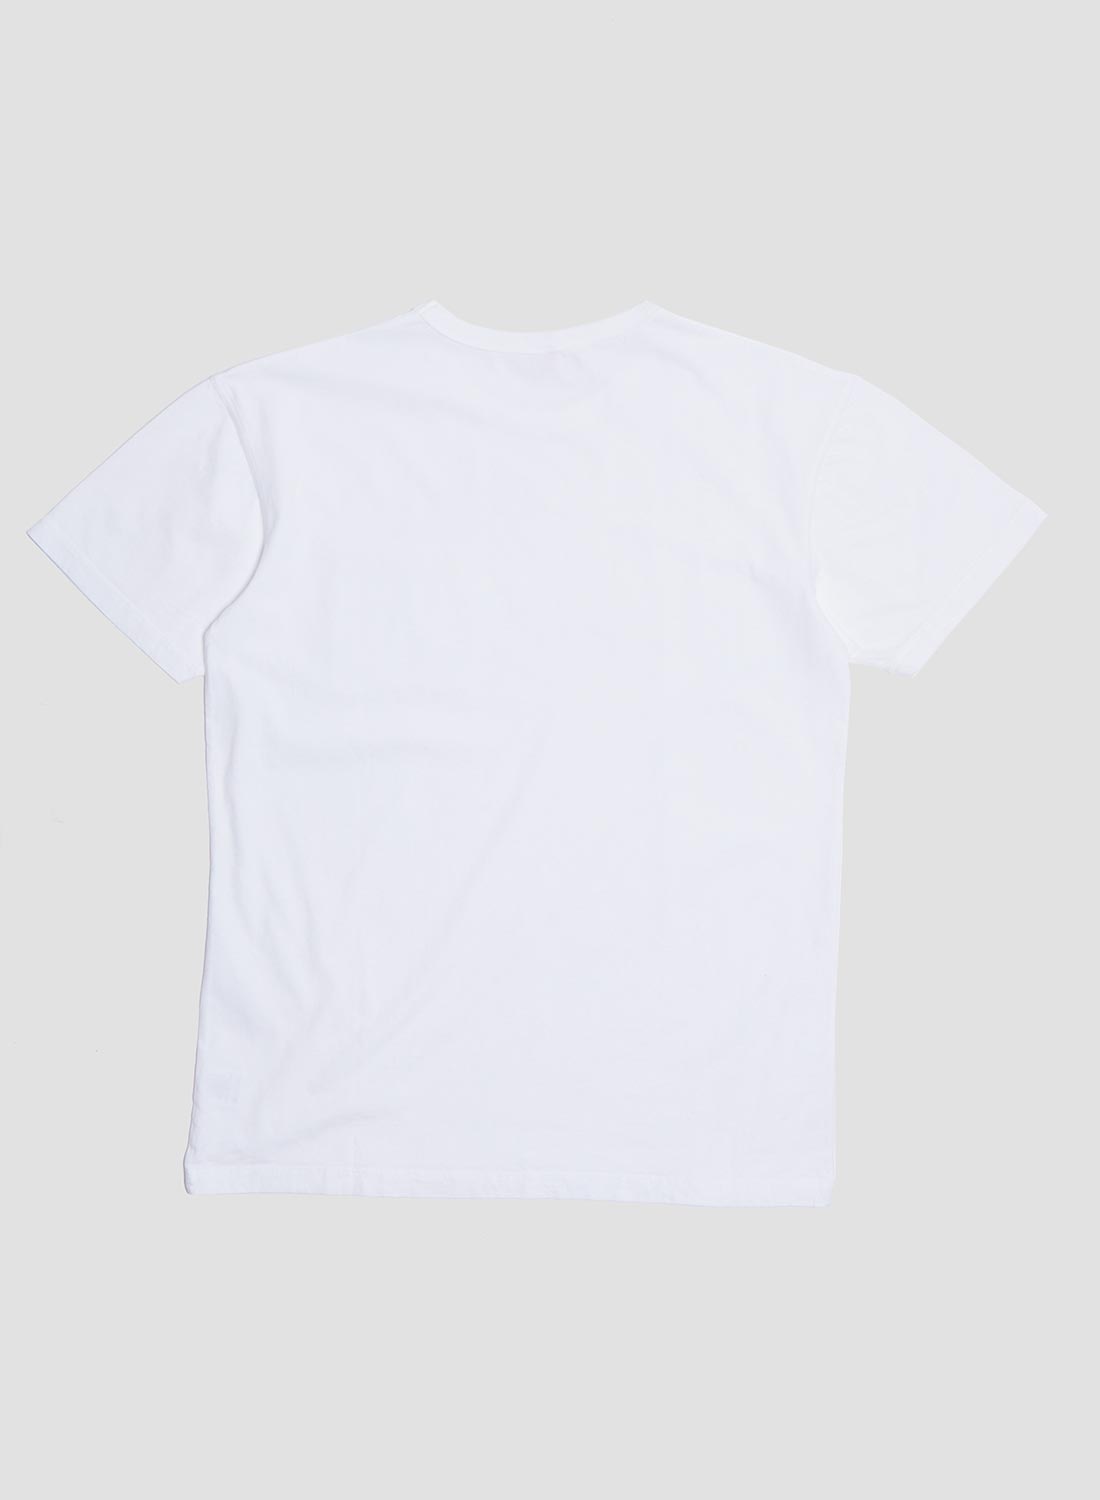 Classic Pocket Tee in White - 3